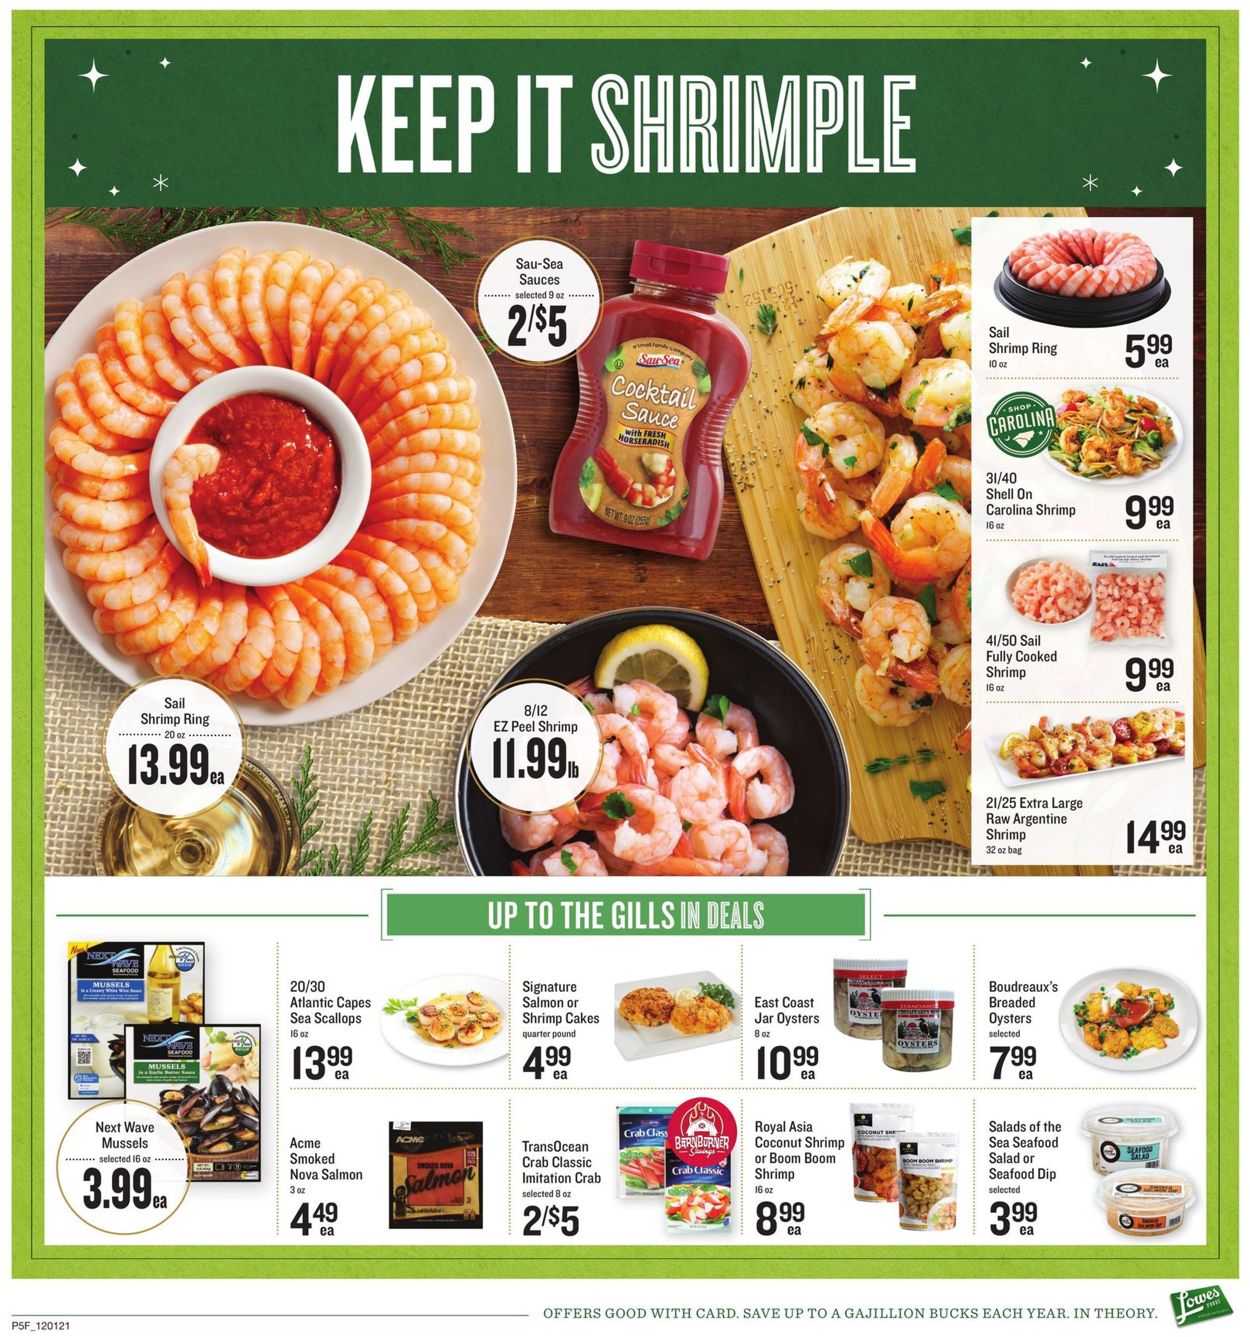 Lowes Foods HOLIDAYS 2021 Weekly Ad Circular - valid 12/01-12/28/2021 (Page 5)